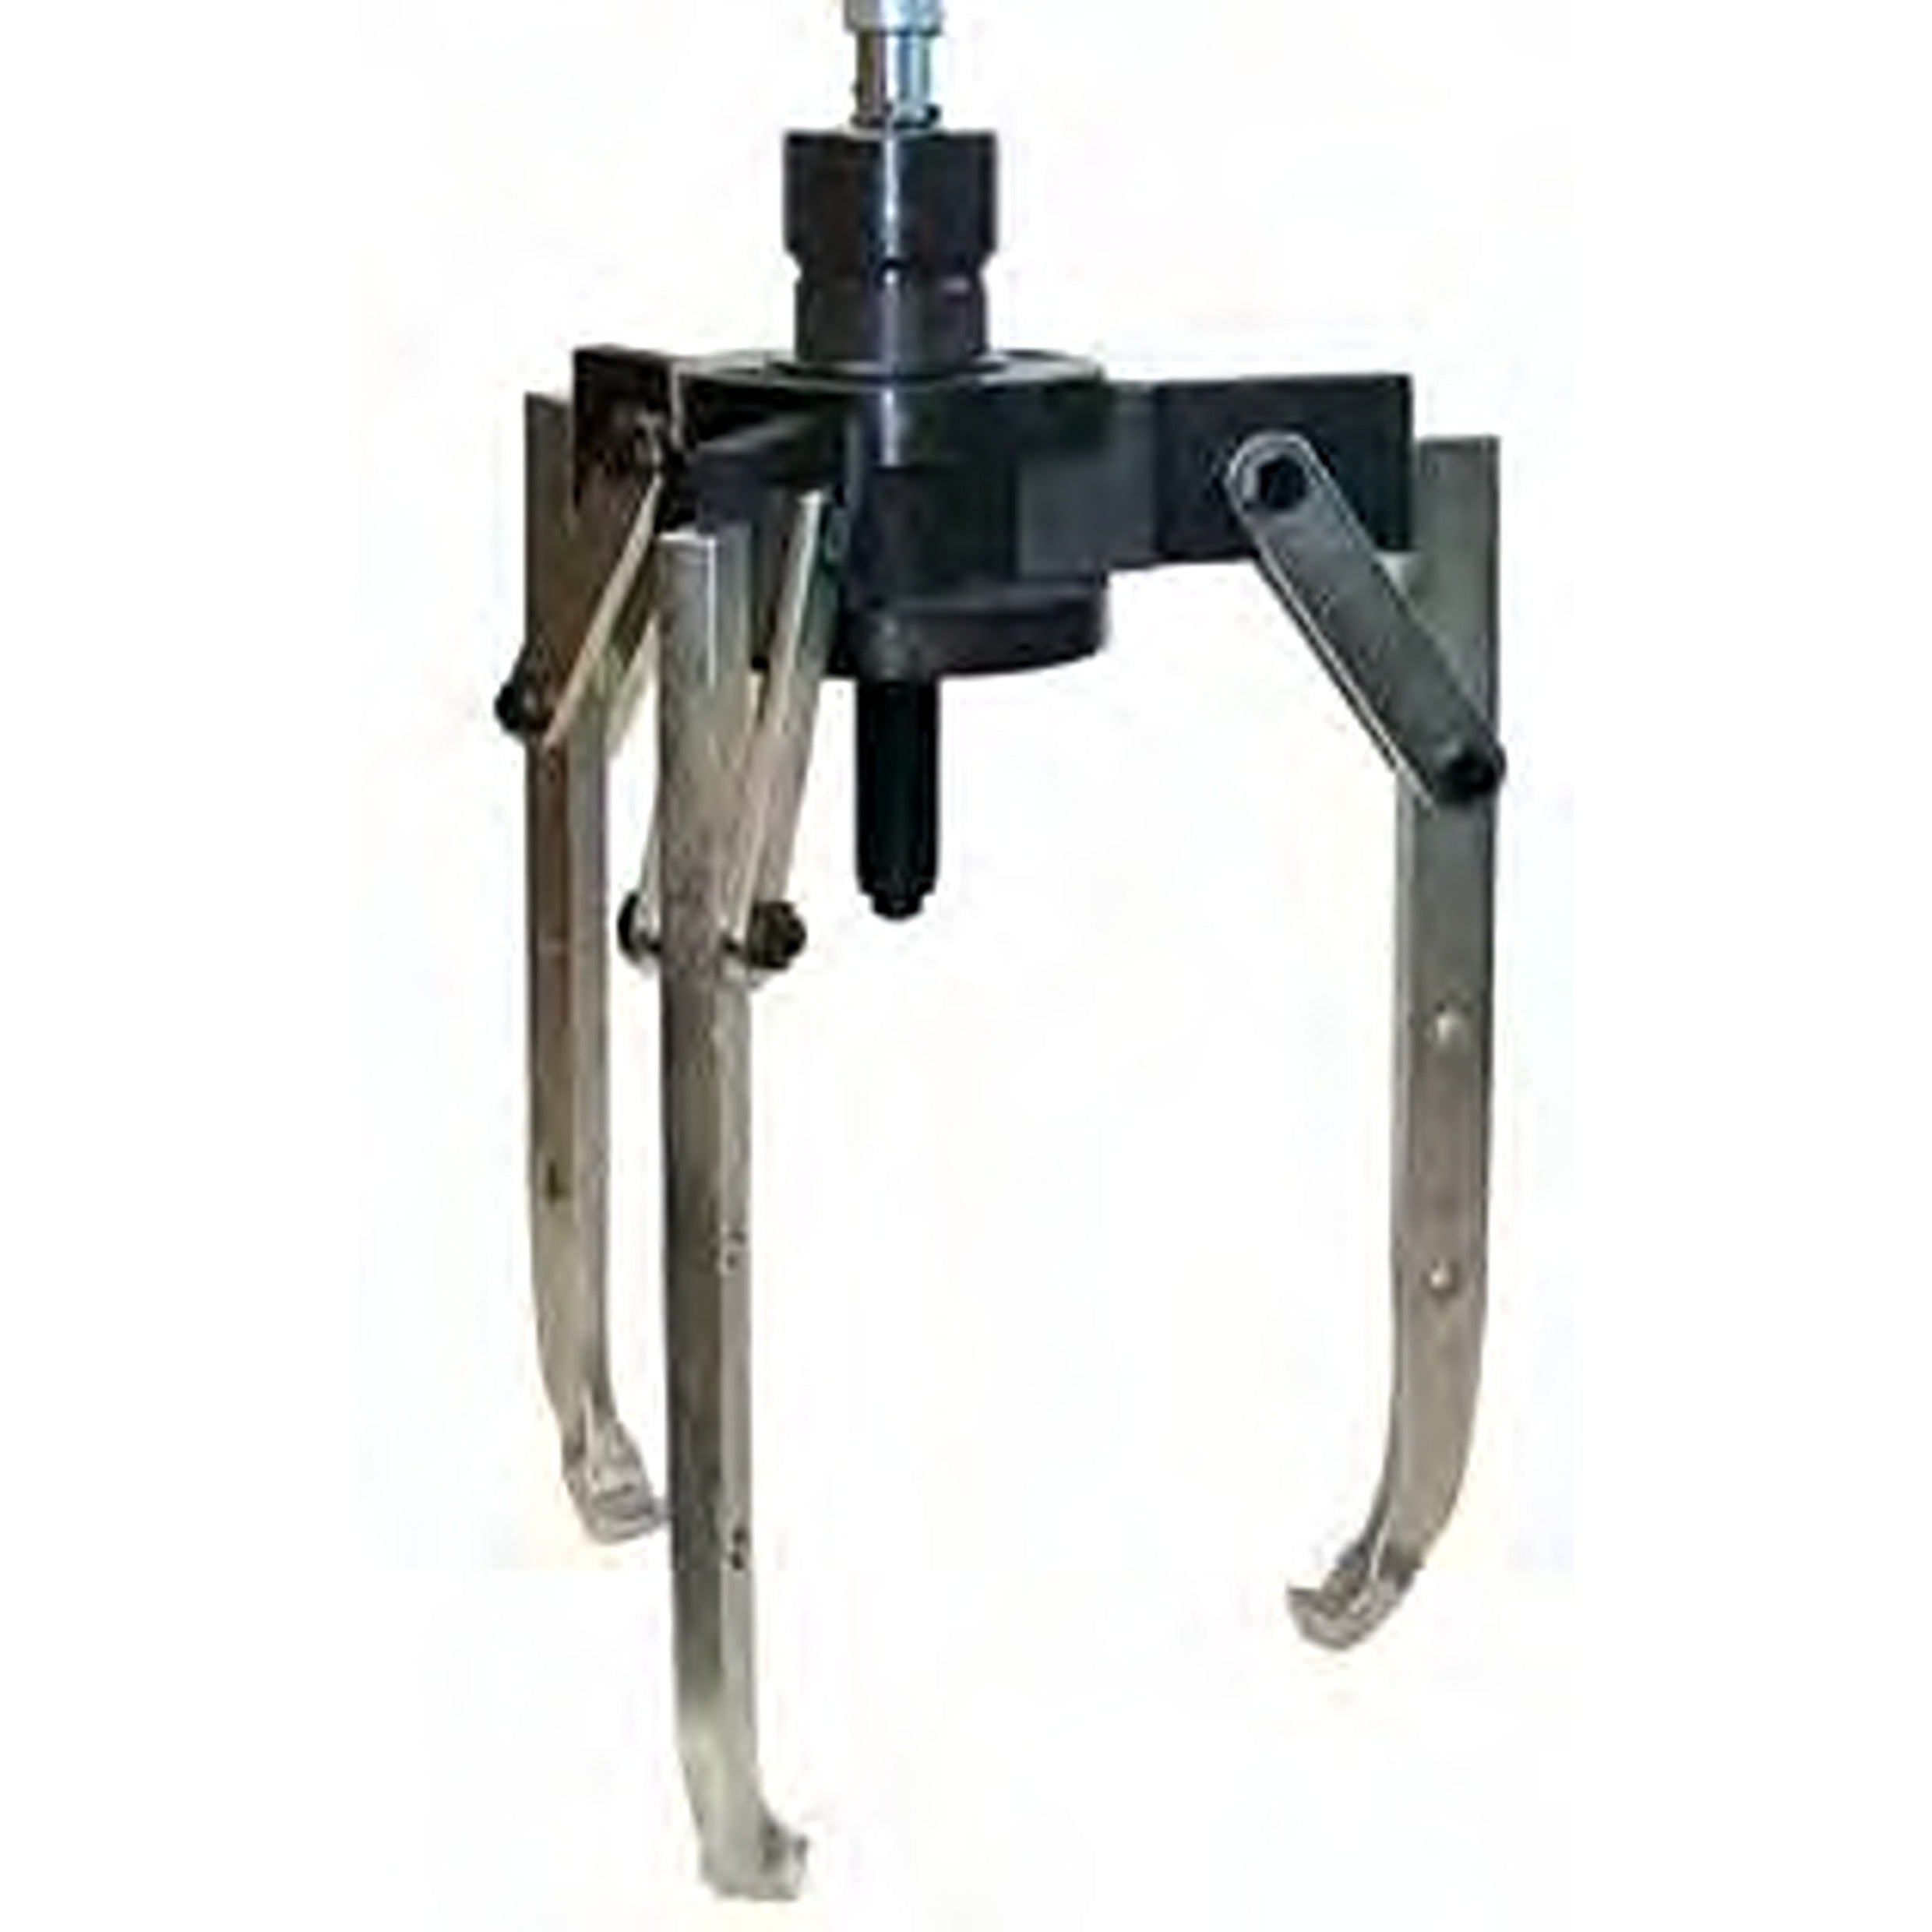 NEXUS HY162 Hydraulic Puller, 3-Arms - Premium Oil Hydraulic Pullers from NEXUS - Shop now at Yew Aik.